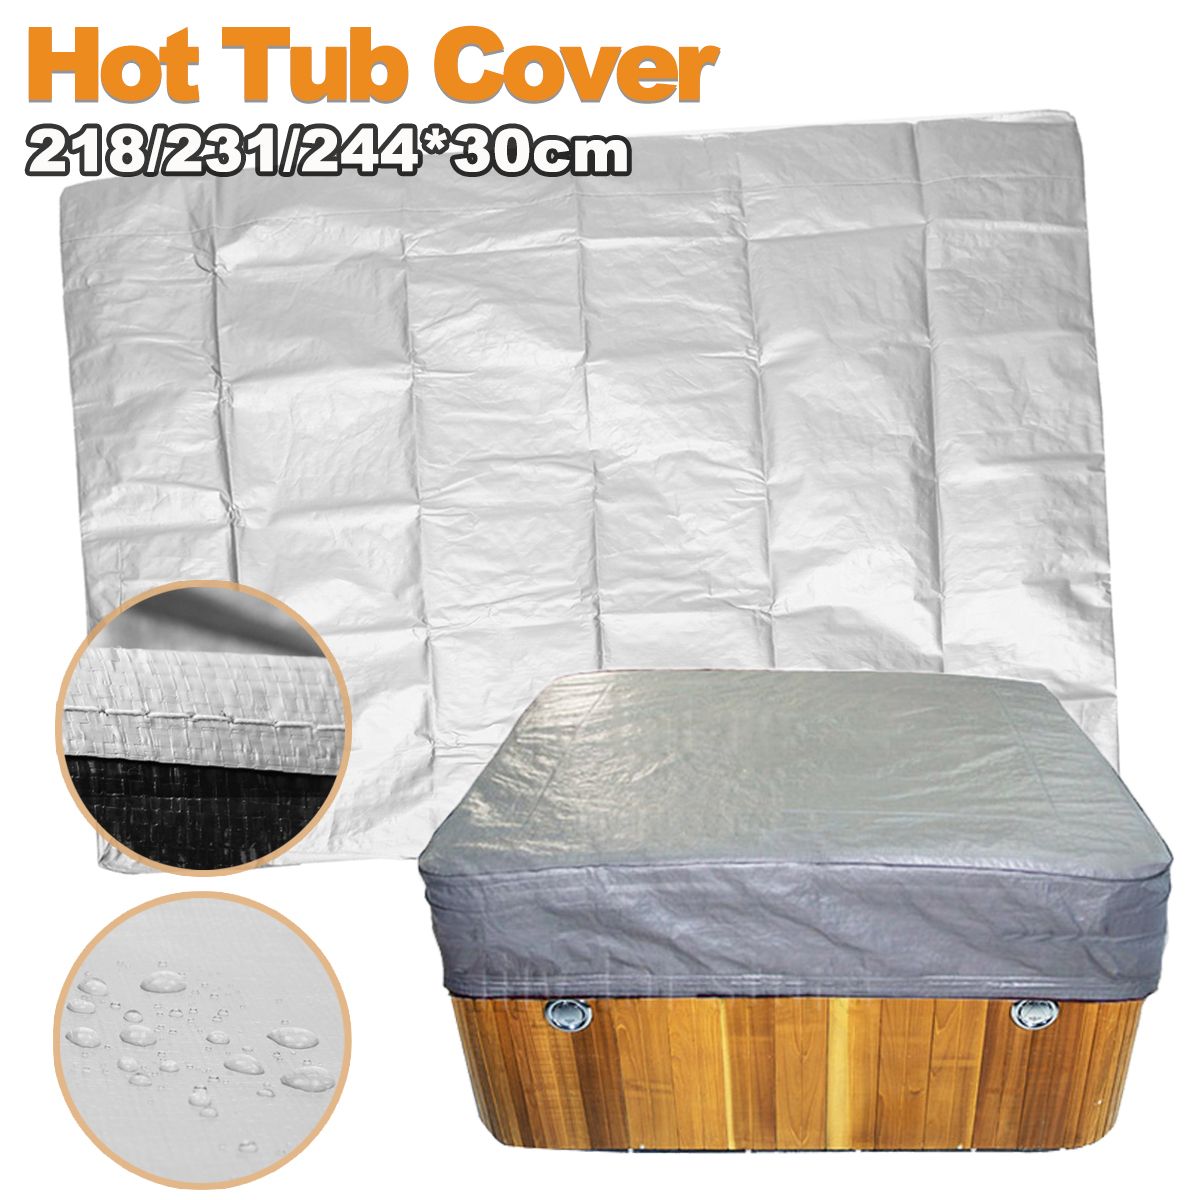 3-Style-Large-Durable-UV-Proof-Spa-Outdoor-Bathtub-Hot-Tub-Cover-Guard-Dust-Cap-1326455